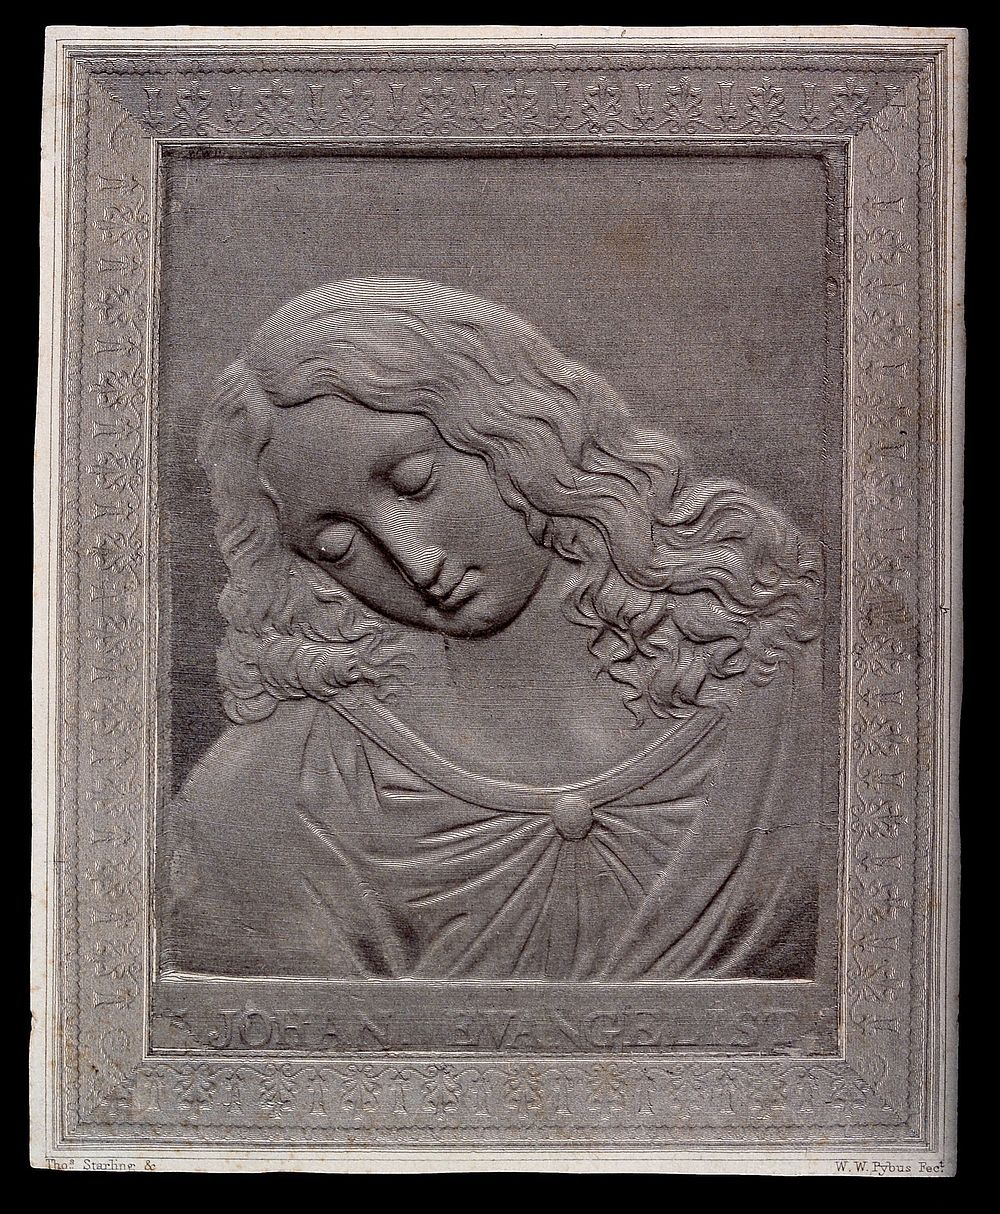 Saint John the Evangelist. Engraving by W.W. Pybus and T. Starling.